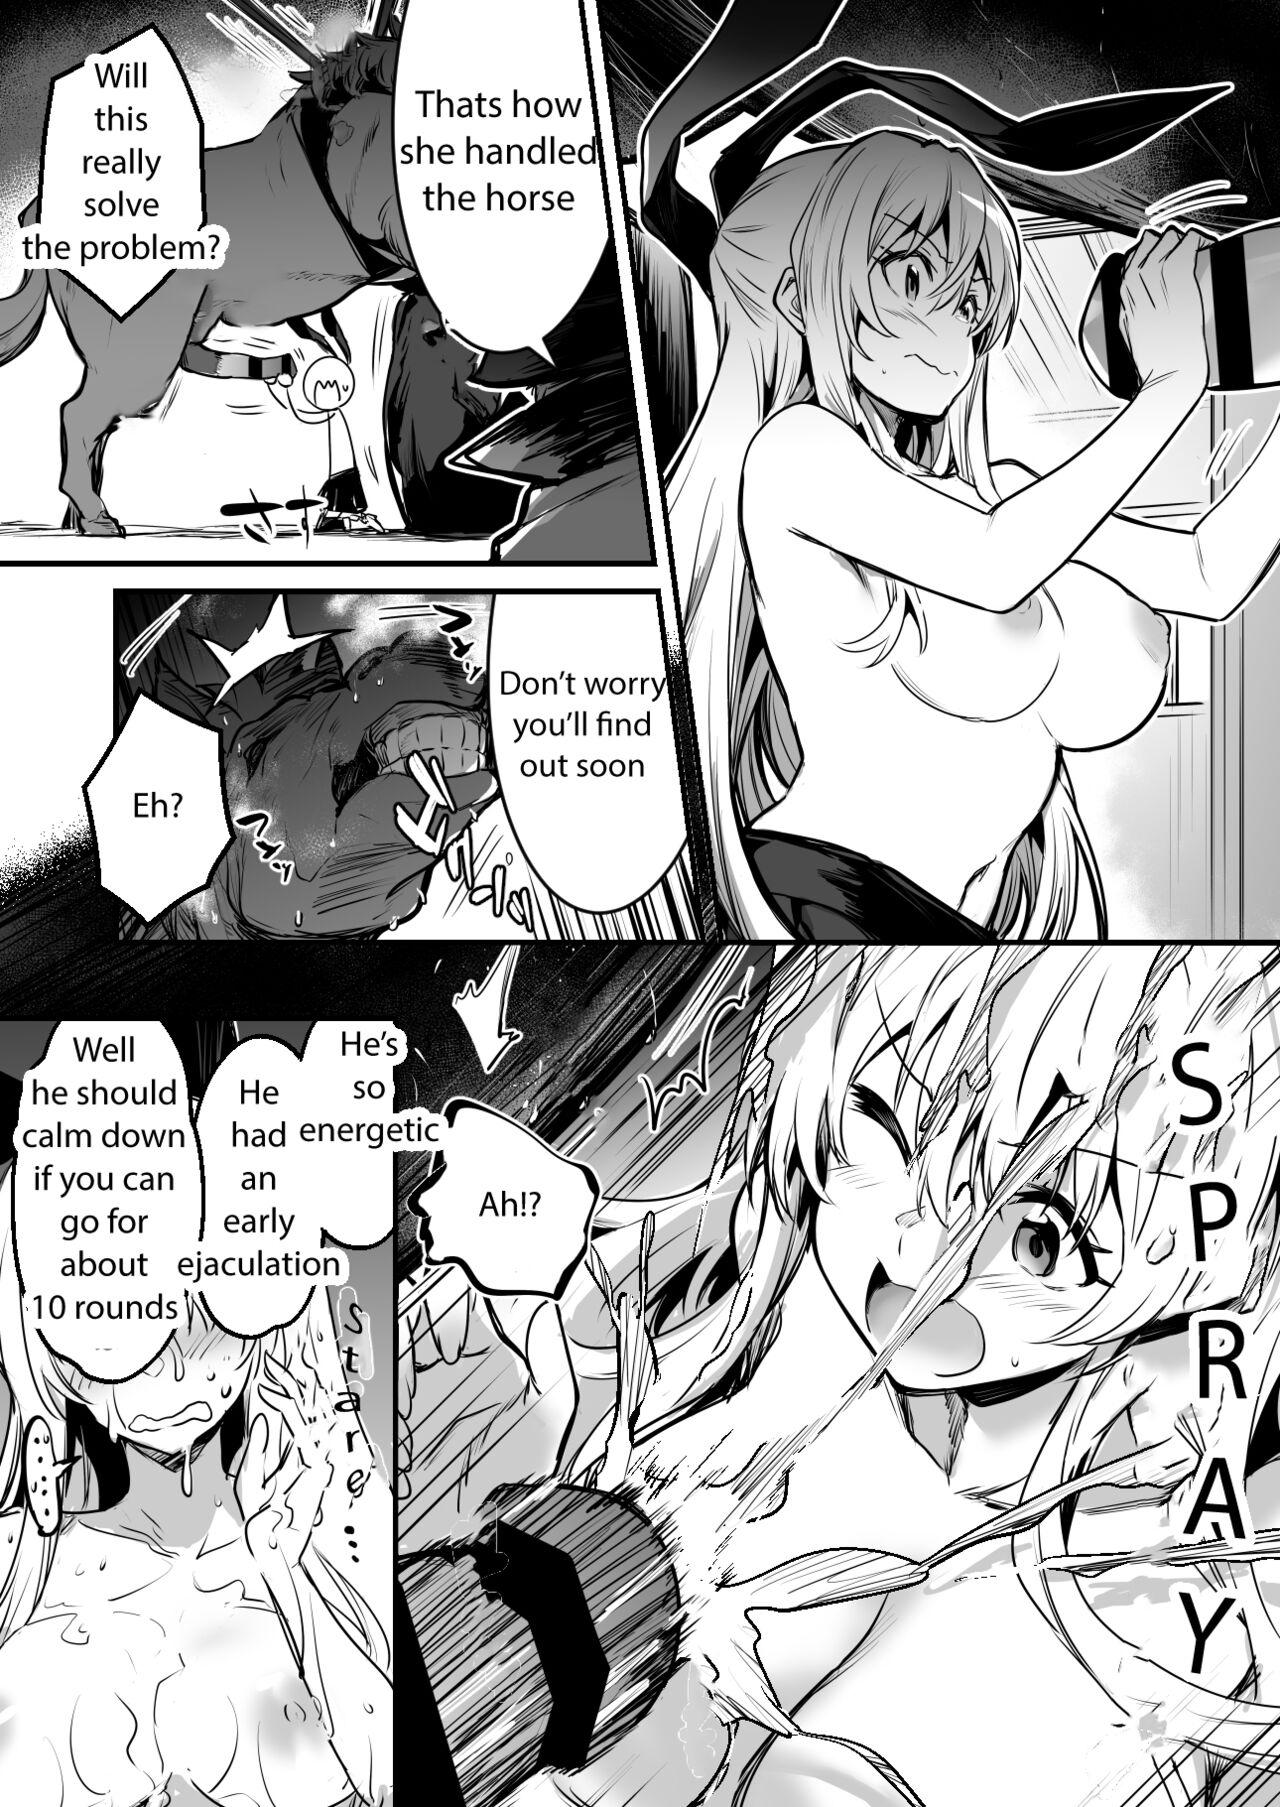 Fitness Adventure-chan helps the lustful horse cum so he'll carry her away Step Fantasy - Page 3